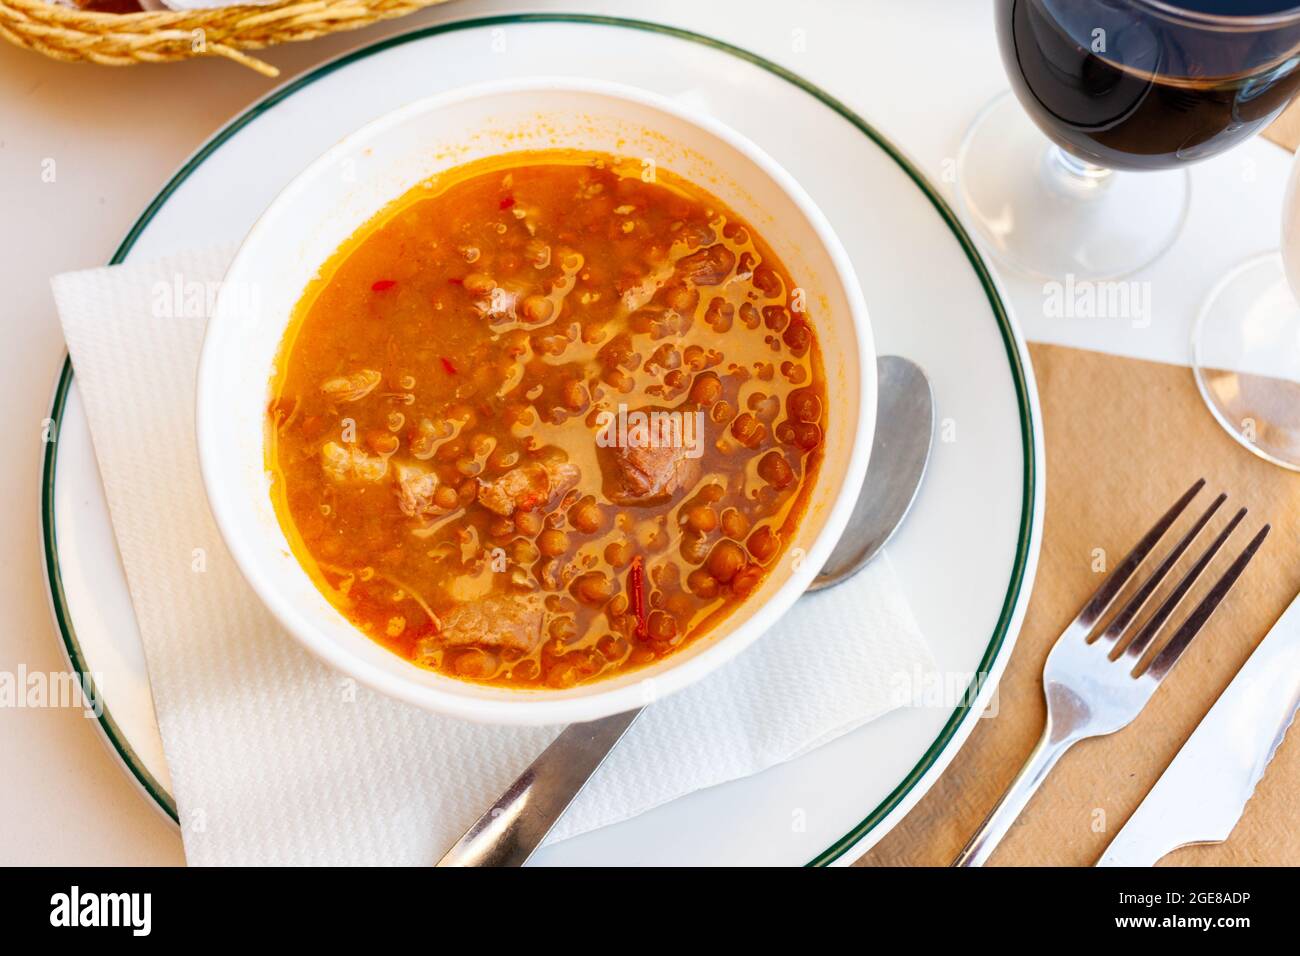 Spicy stewed lentils with chorizo, meat and vegetables Stock Photo